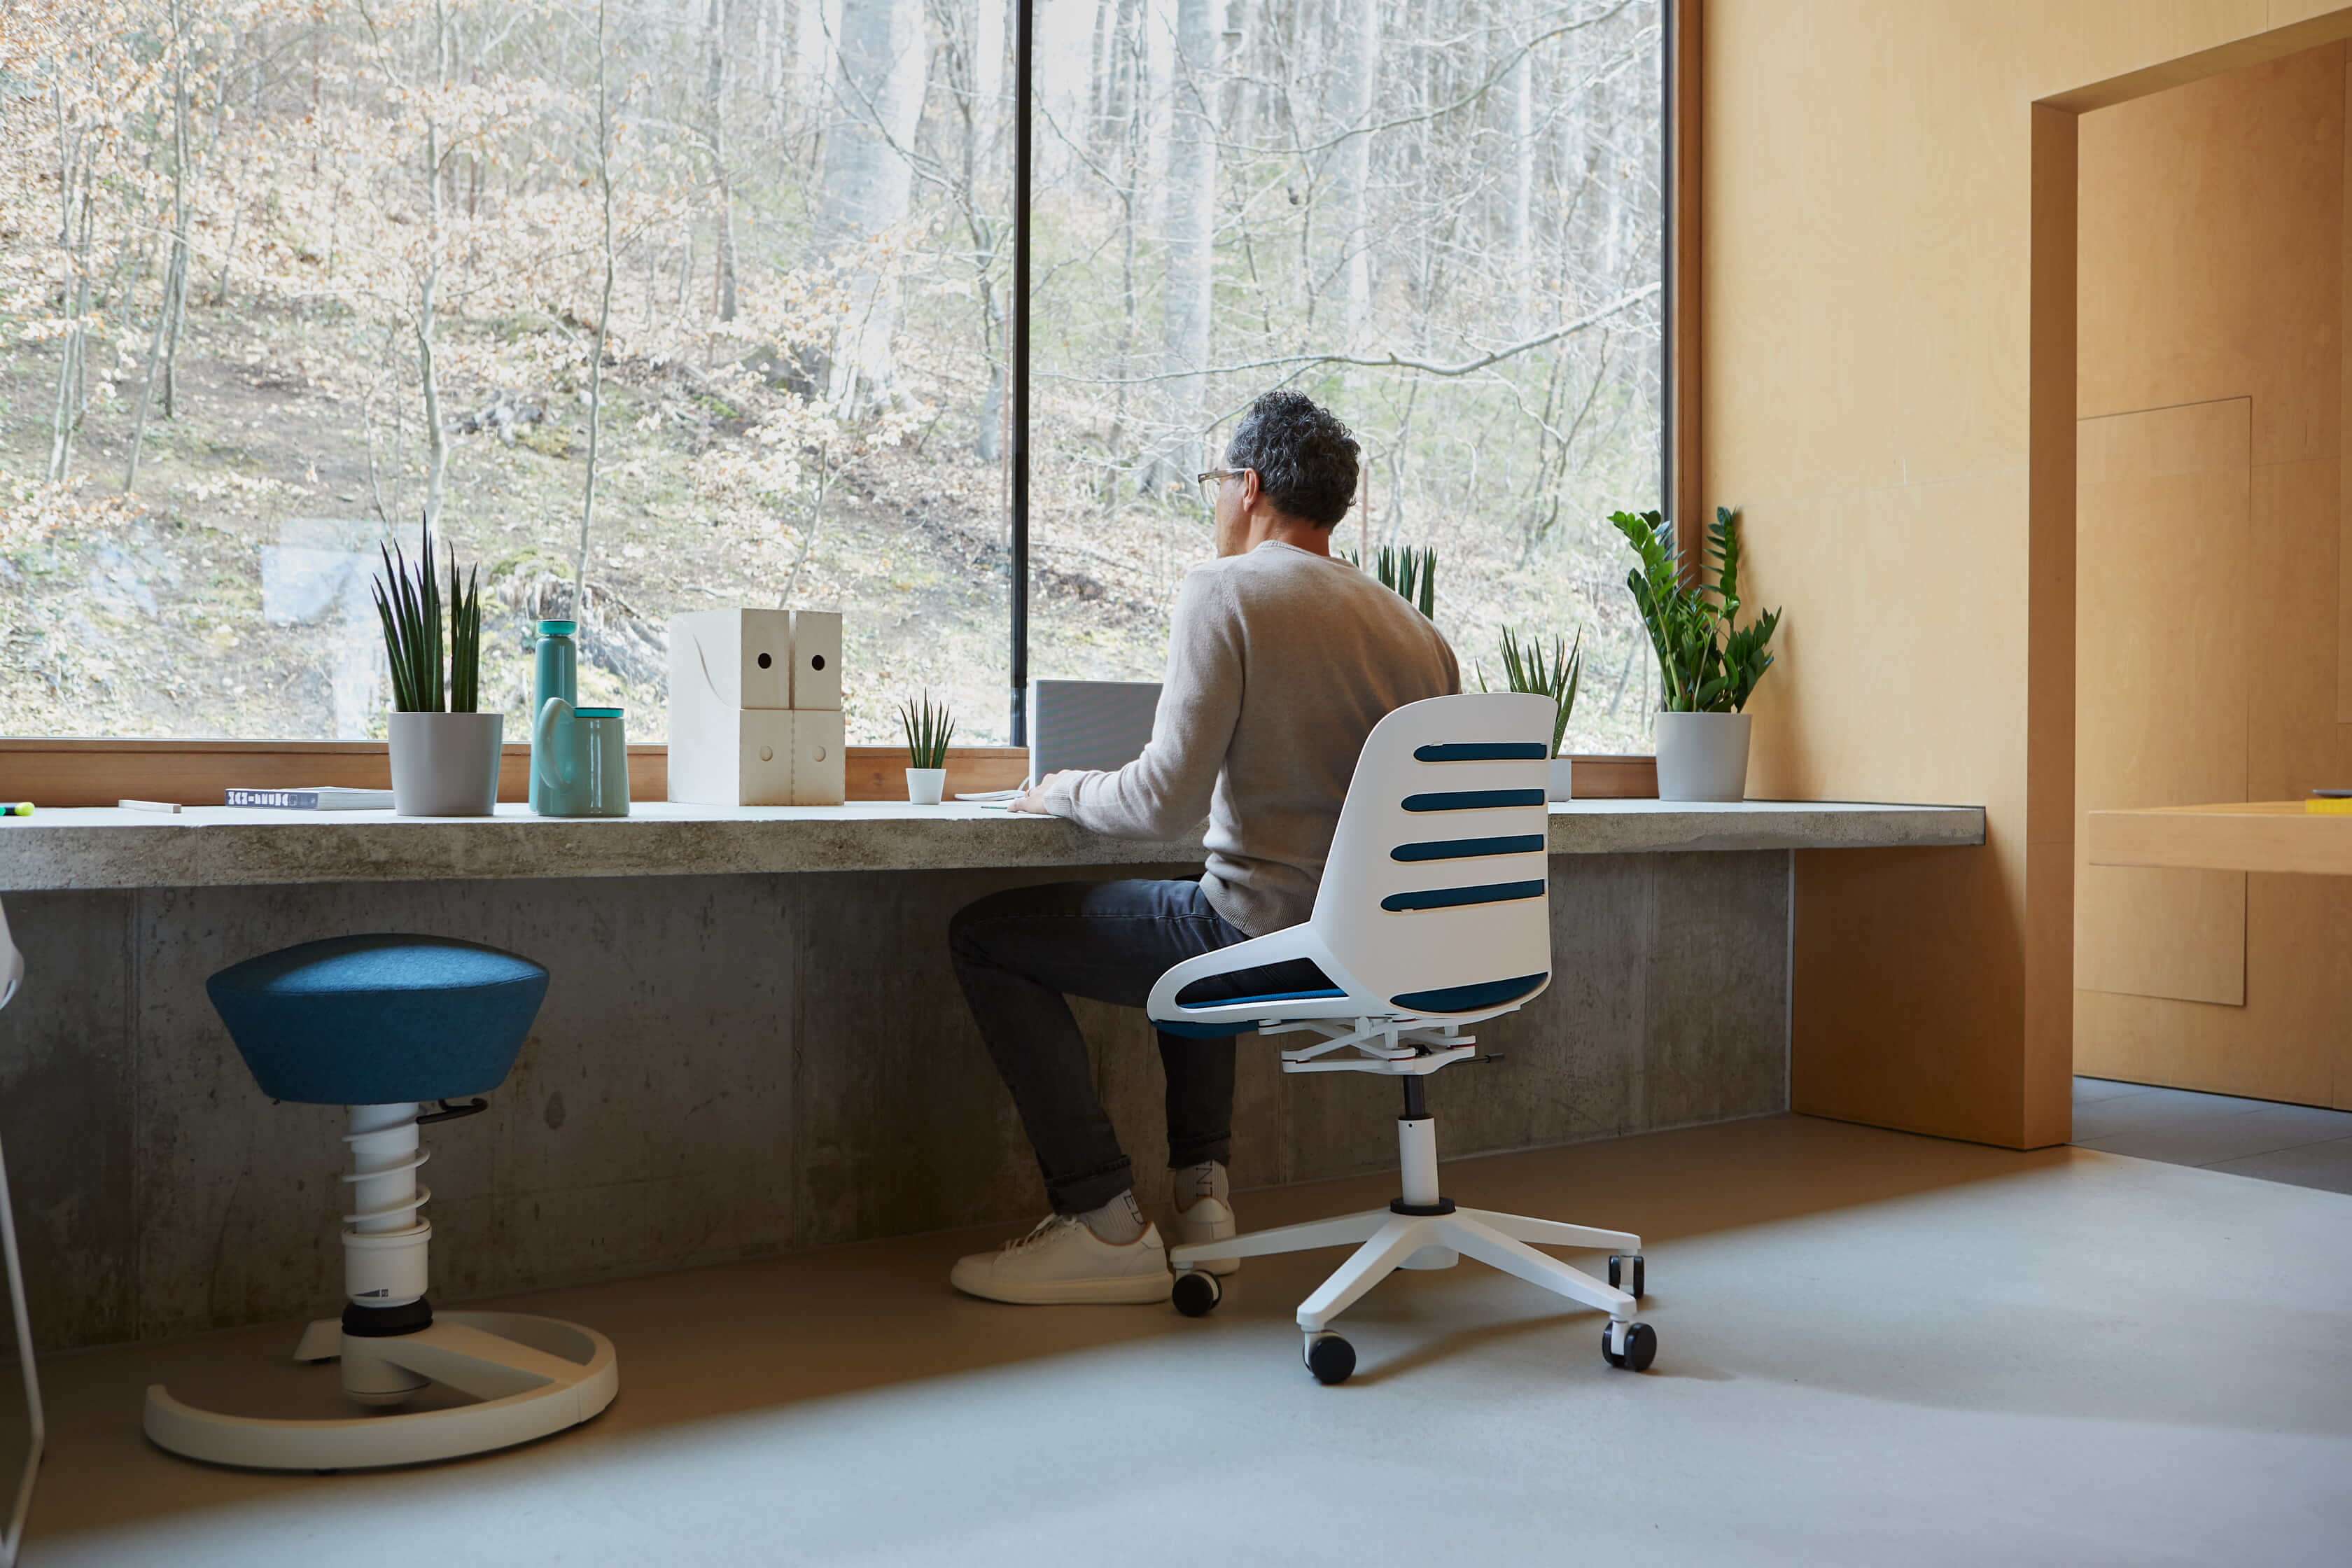 The Aeris Numo Task office chair allows easy movements in all directions.